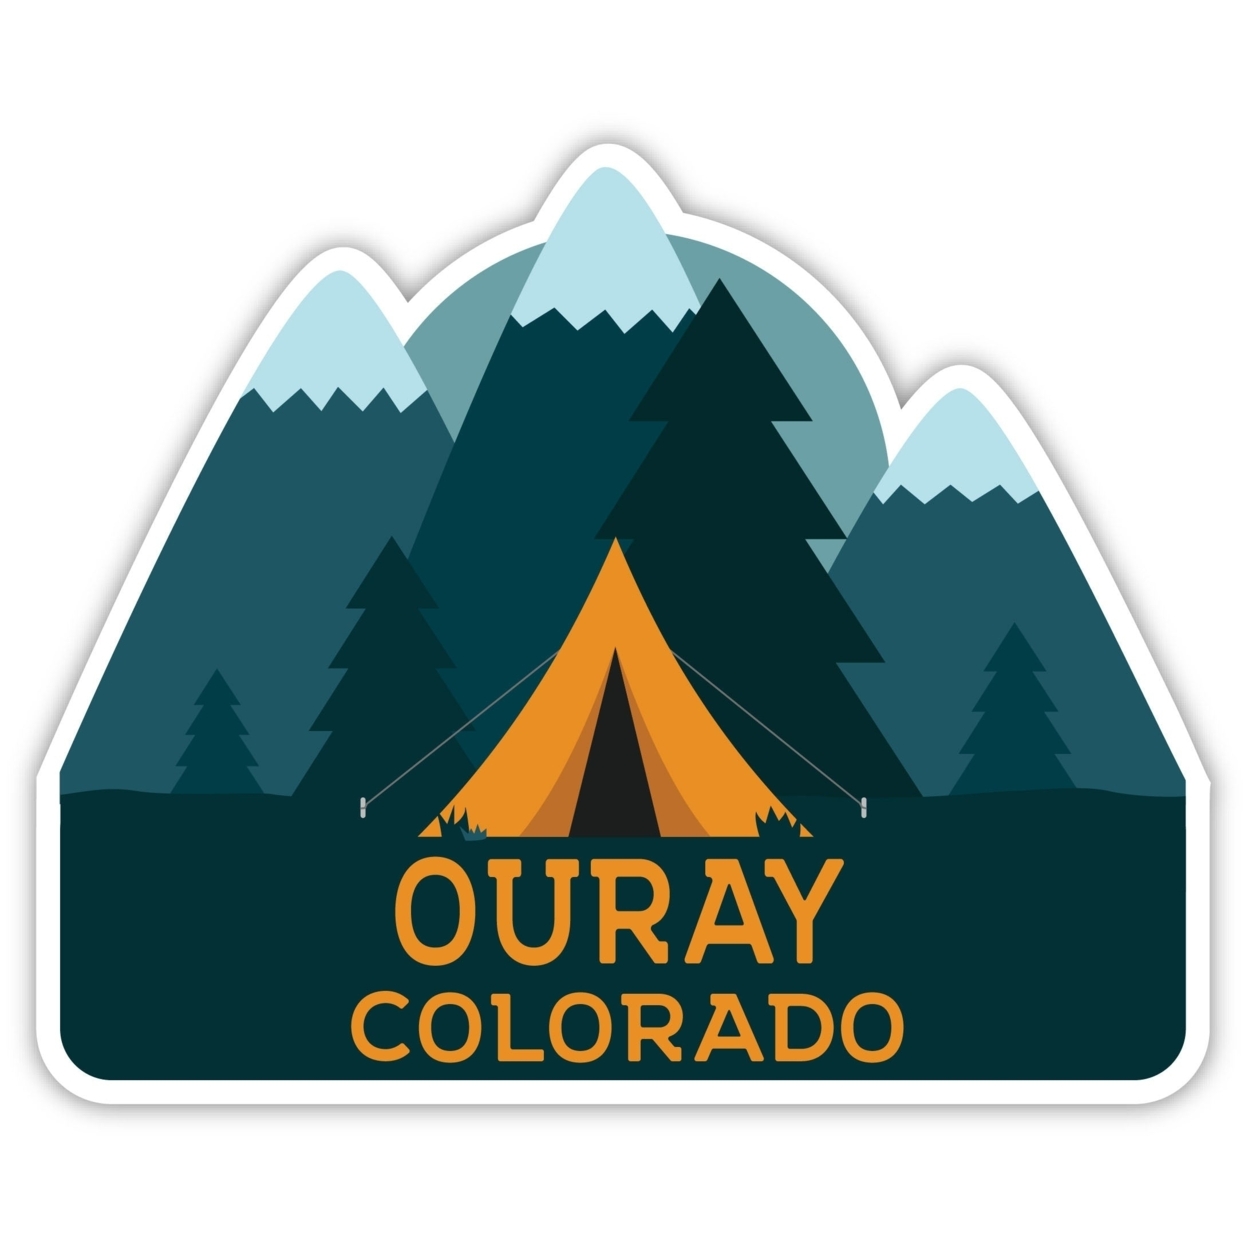 Ouray Colorado Souvenir Decorative Stickers (Choose Theme And Size) - Single Unit, 4-Inch, Tent